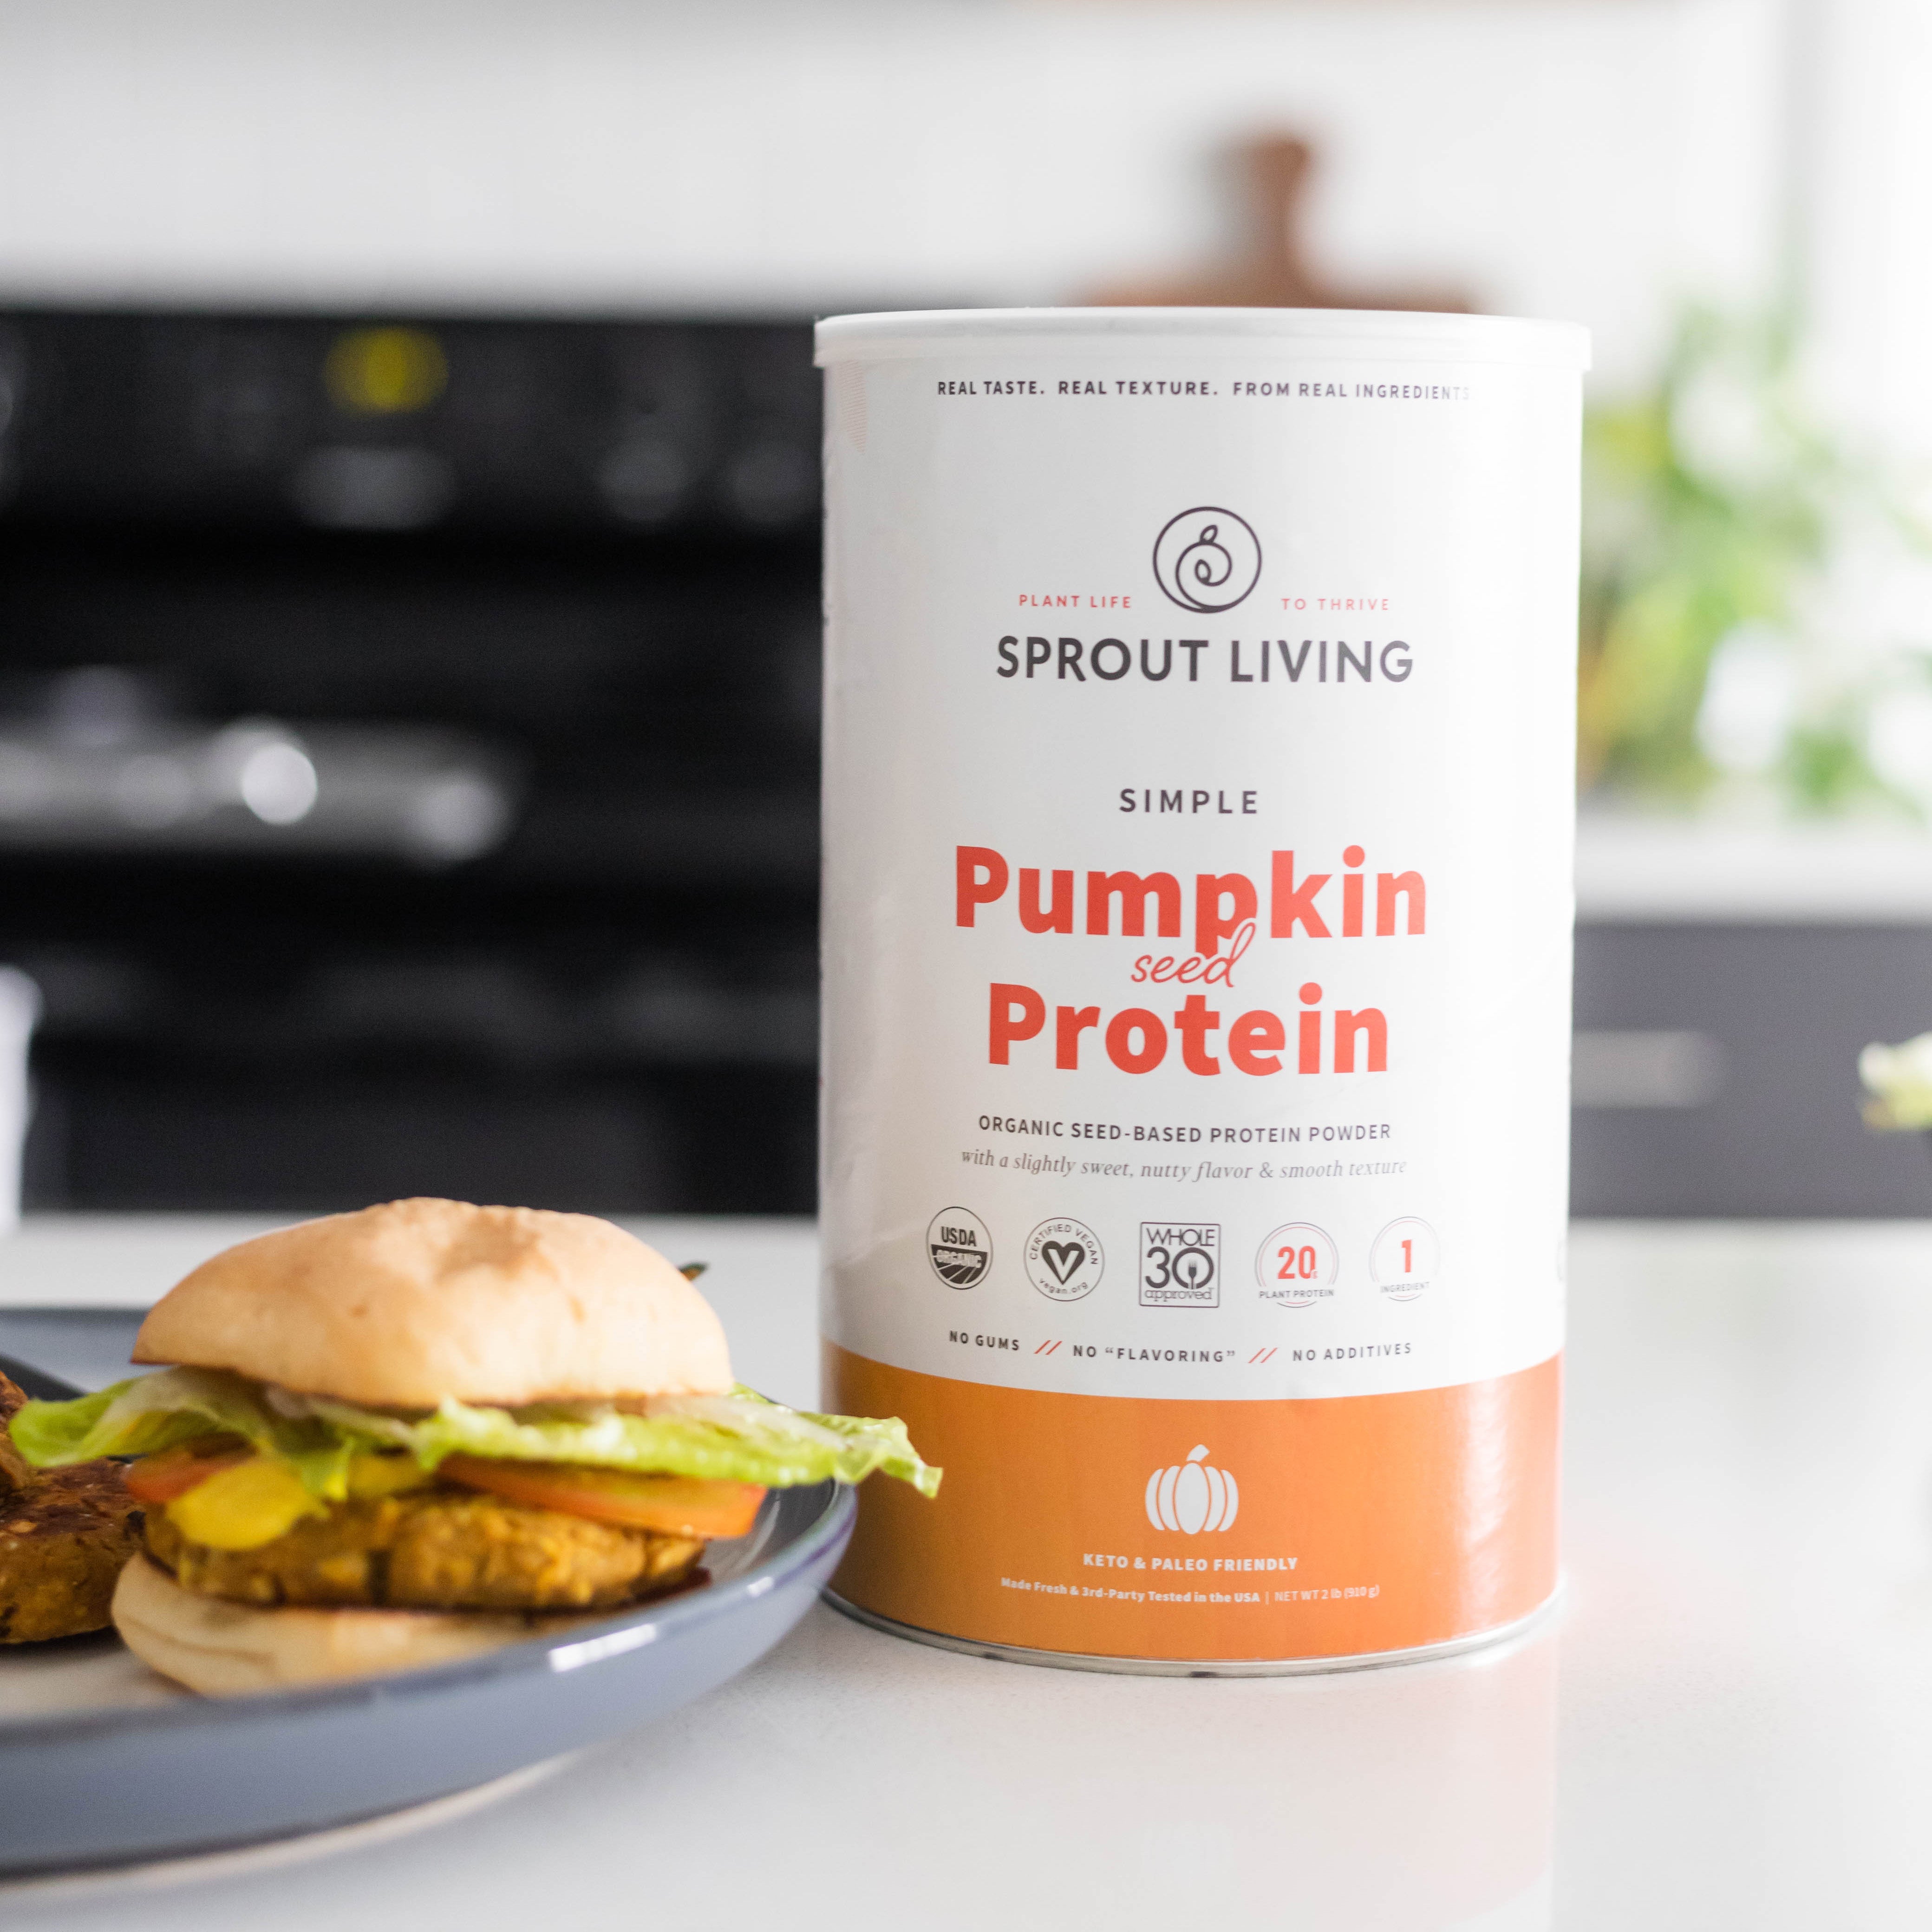 Simple Pumpkin Seed Protein and Burger on Plate